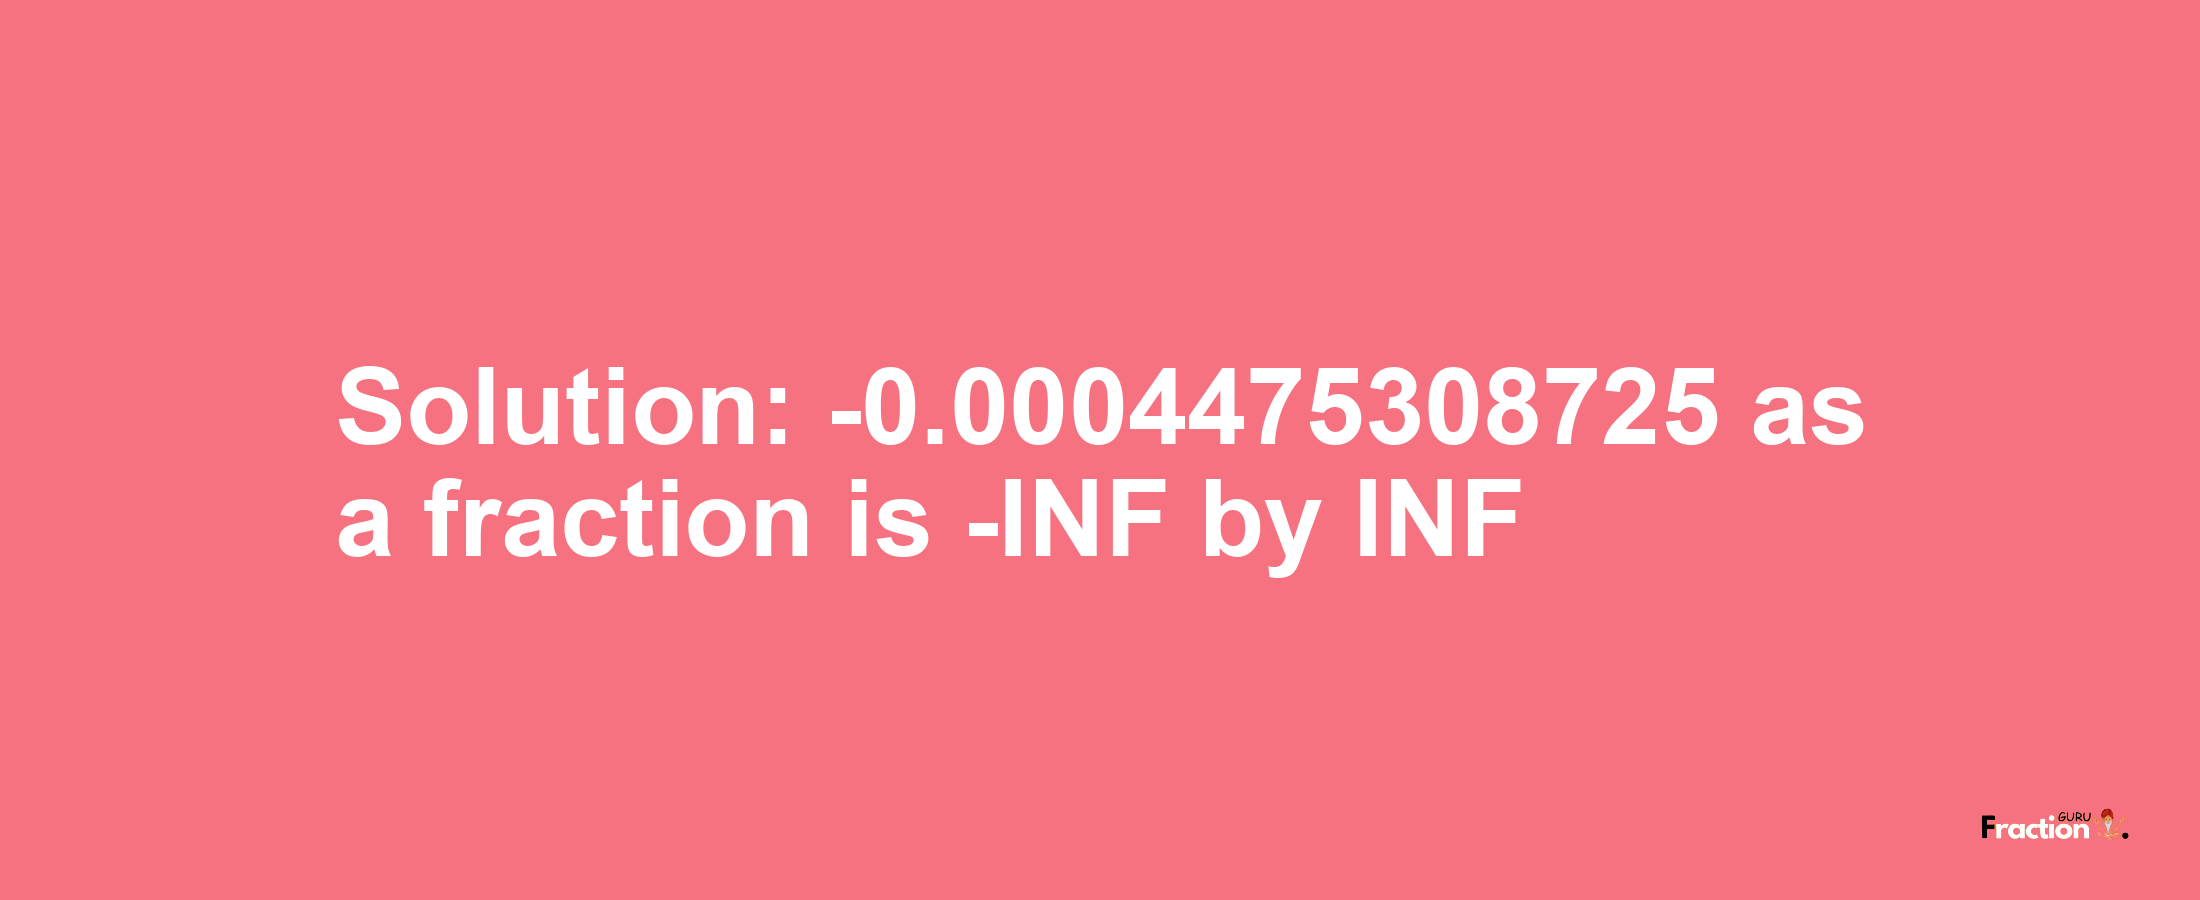 Solution:-0.0004475308725 as a fraction is -INF/INF